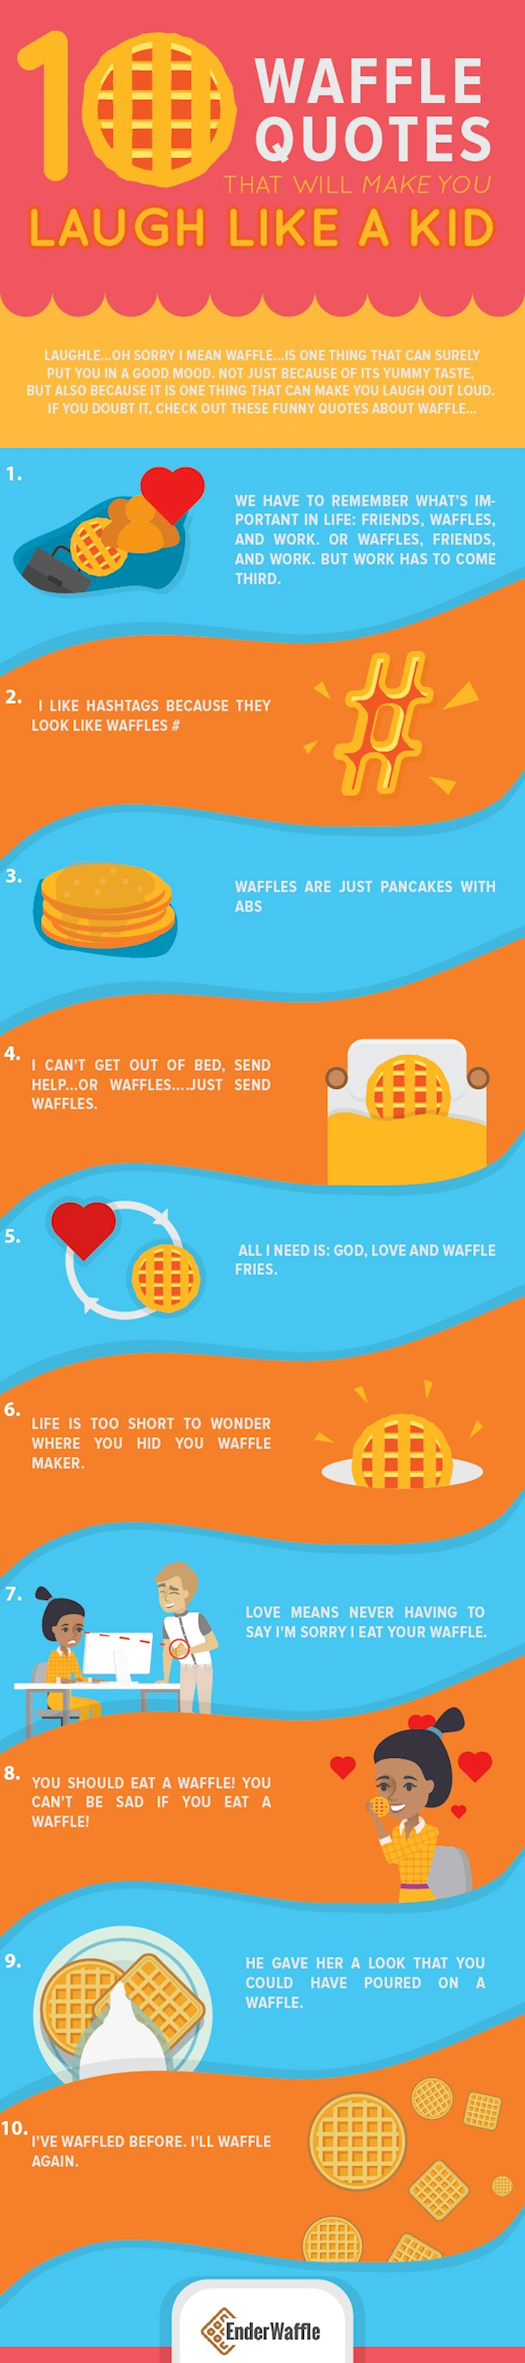 Funny waffle quotes